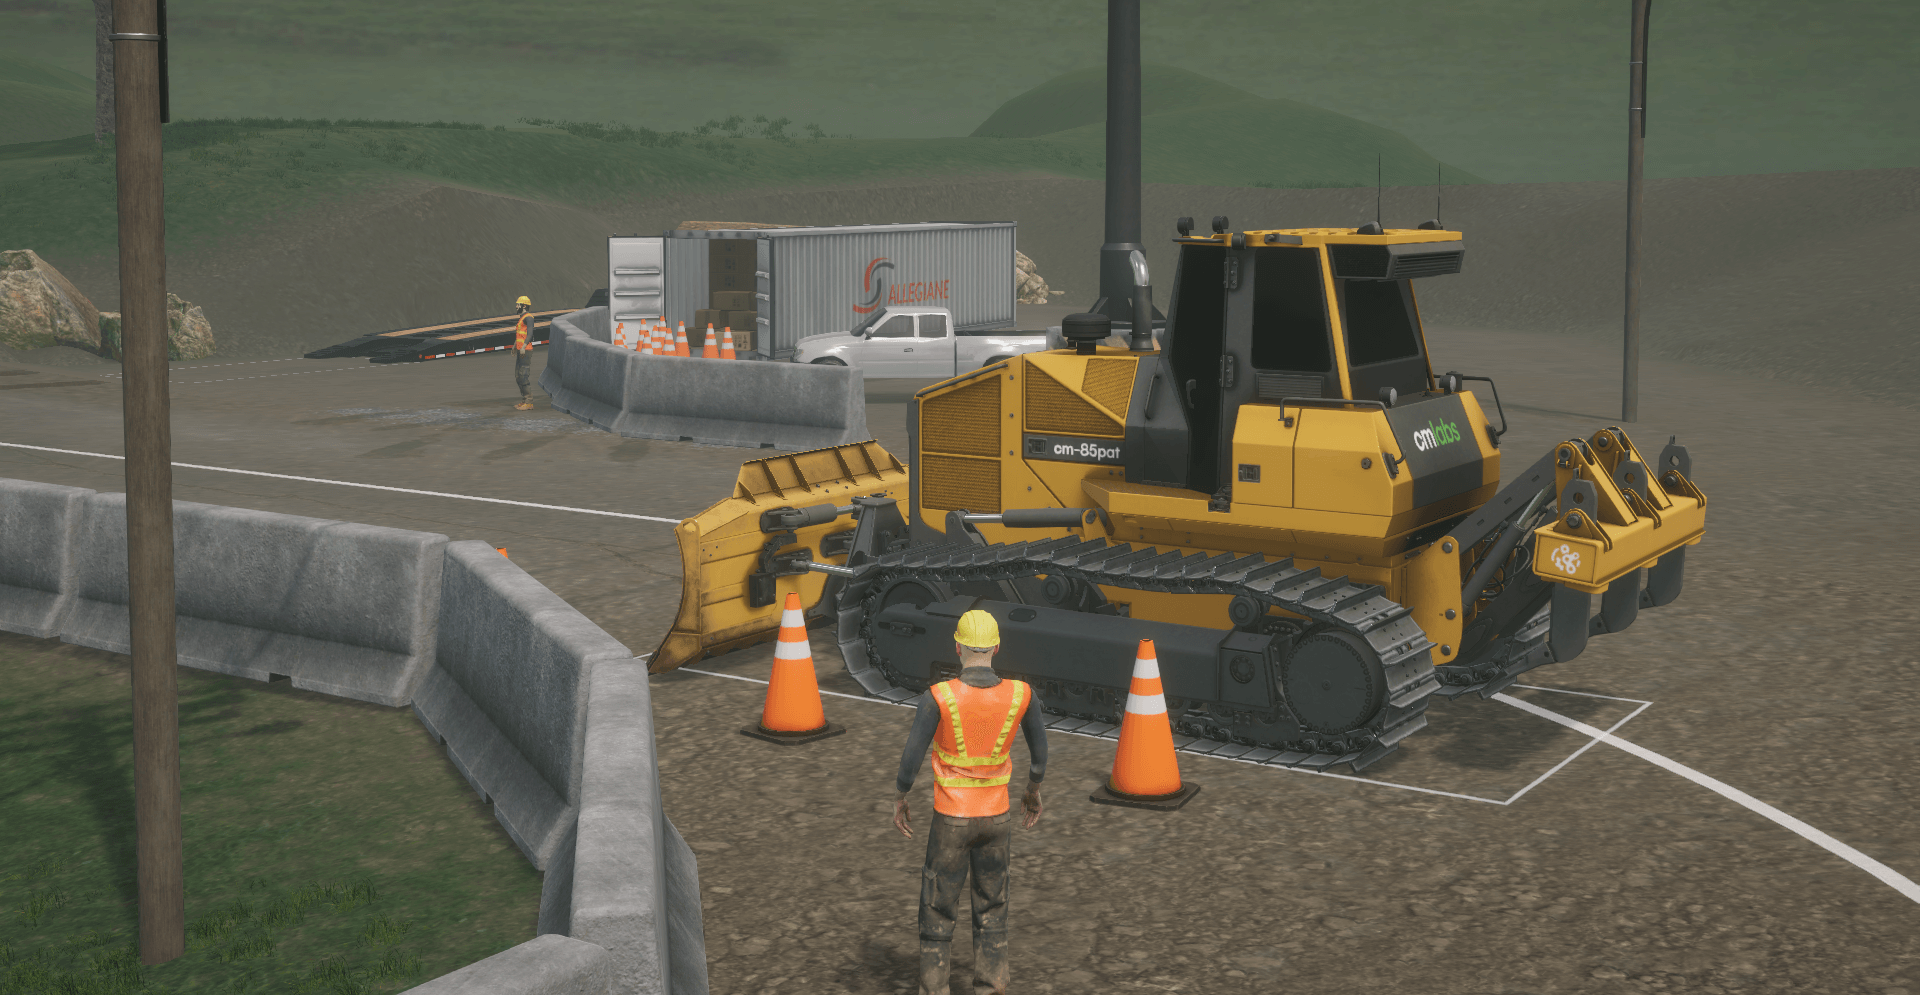 Dozer simulator training pack – Back facing within cones and lines – With operator beside